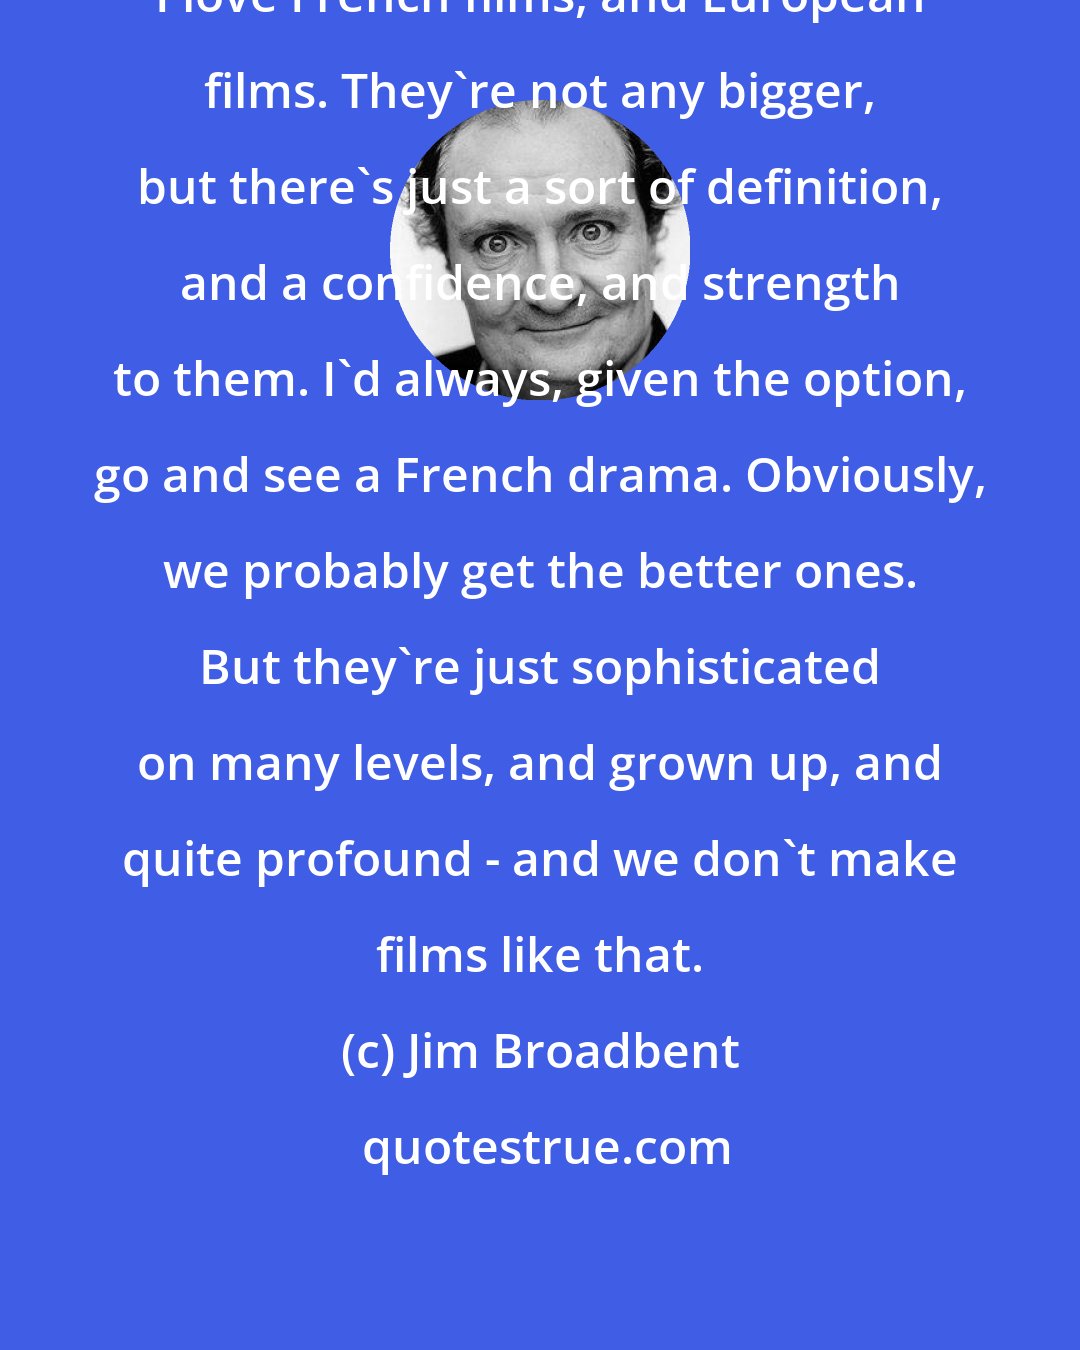 Jim Broadbent: I love French films, and European films. They're not any bigger, but there's just a sort of definition, and a confidence, and strength to them. I'd always, given the option, go and see a French drama. Obviously, we probably get the better ones. But they're just sophisticated on many levels, and grown up, and quite profound - and we don't make films like that.